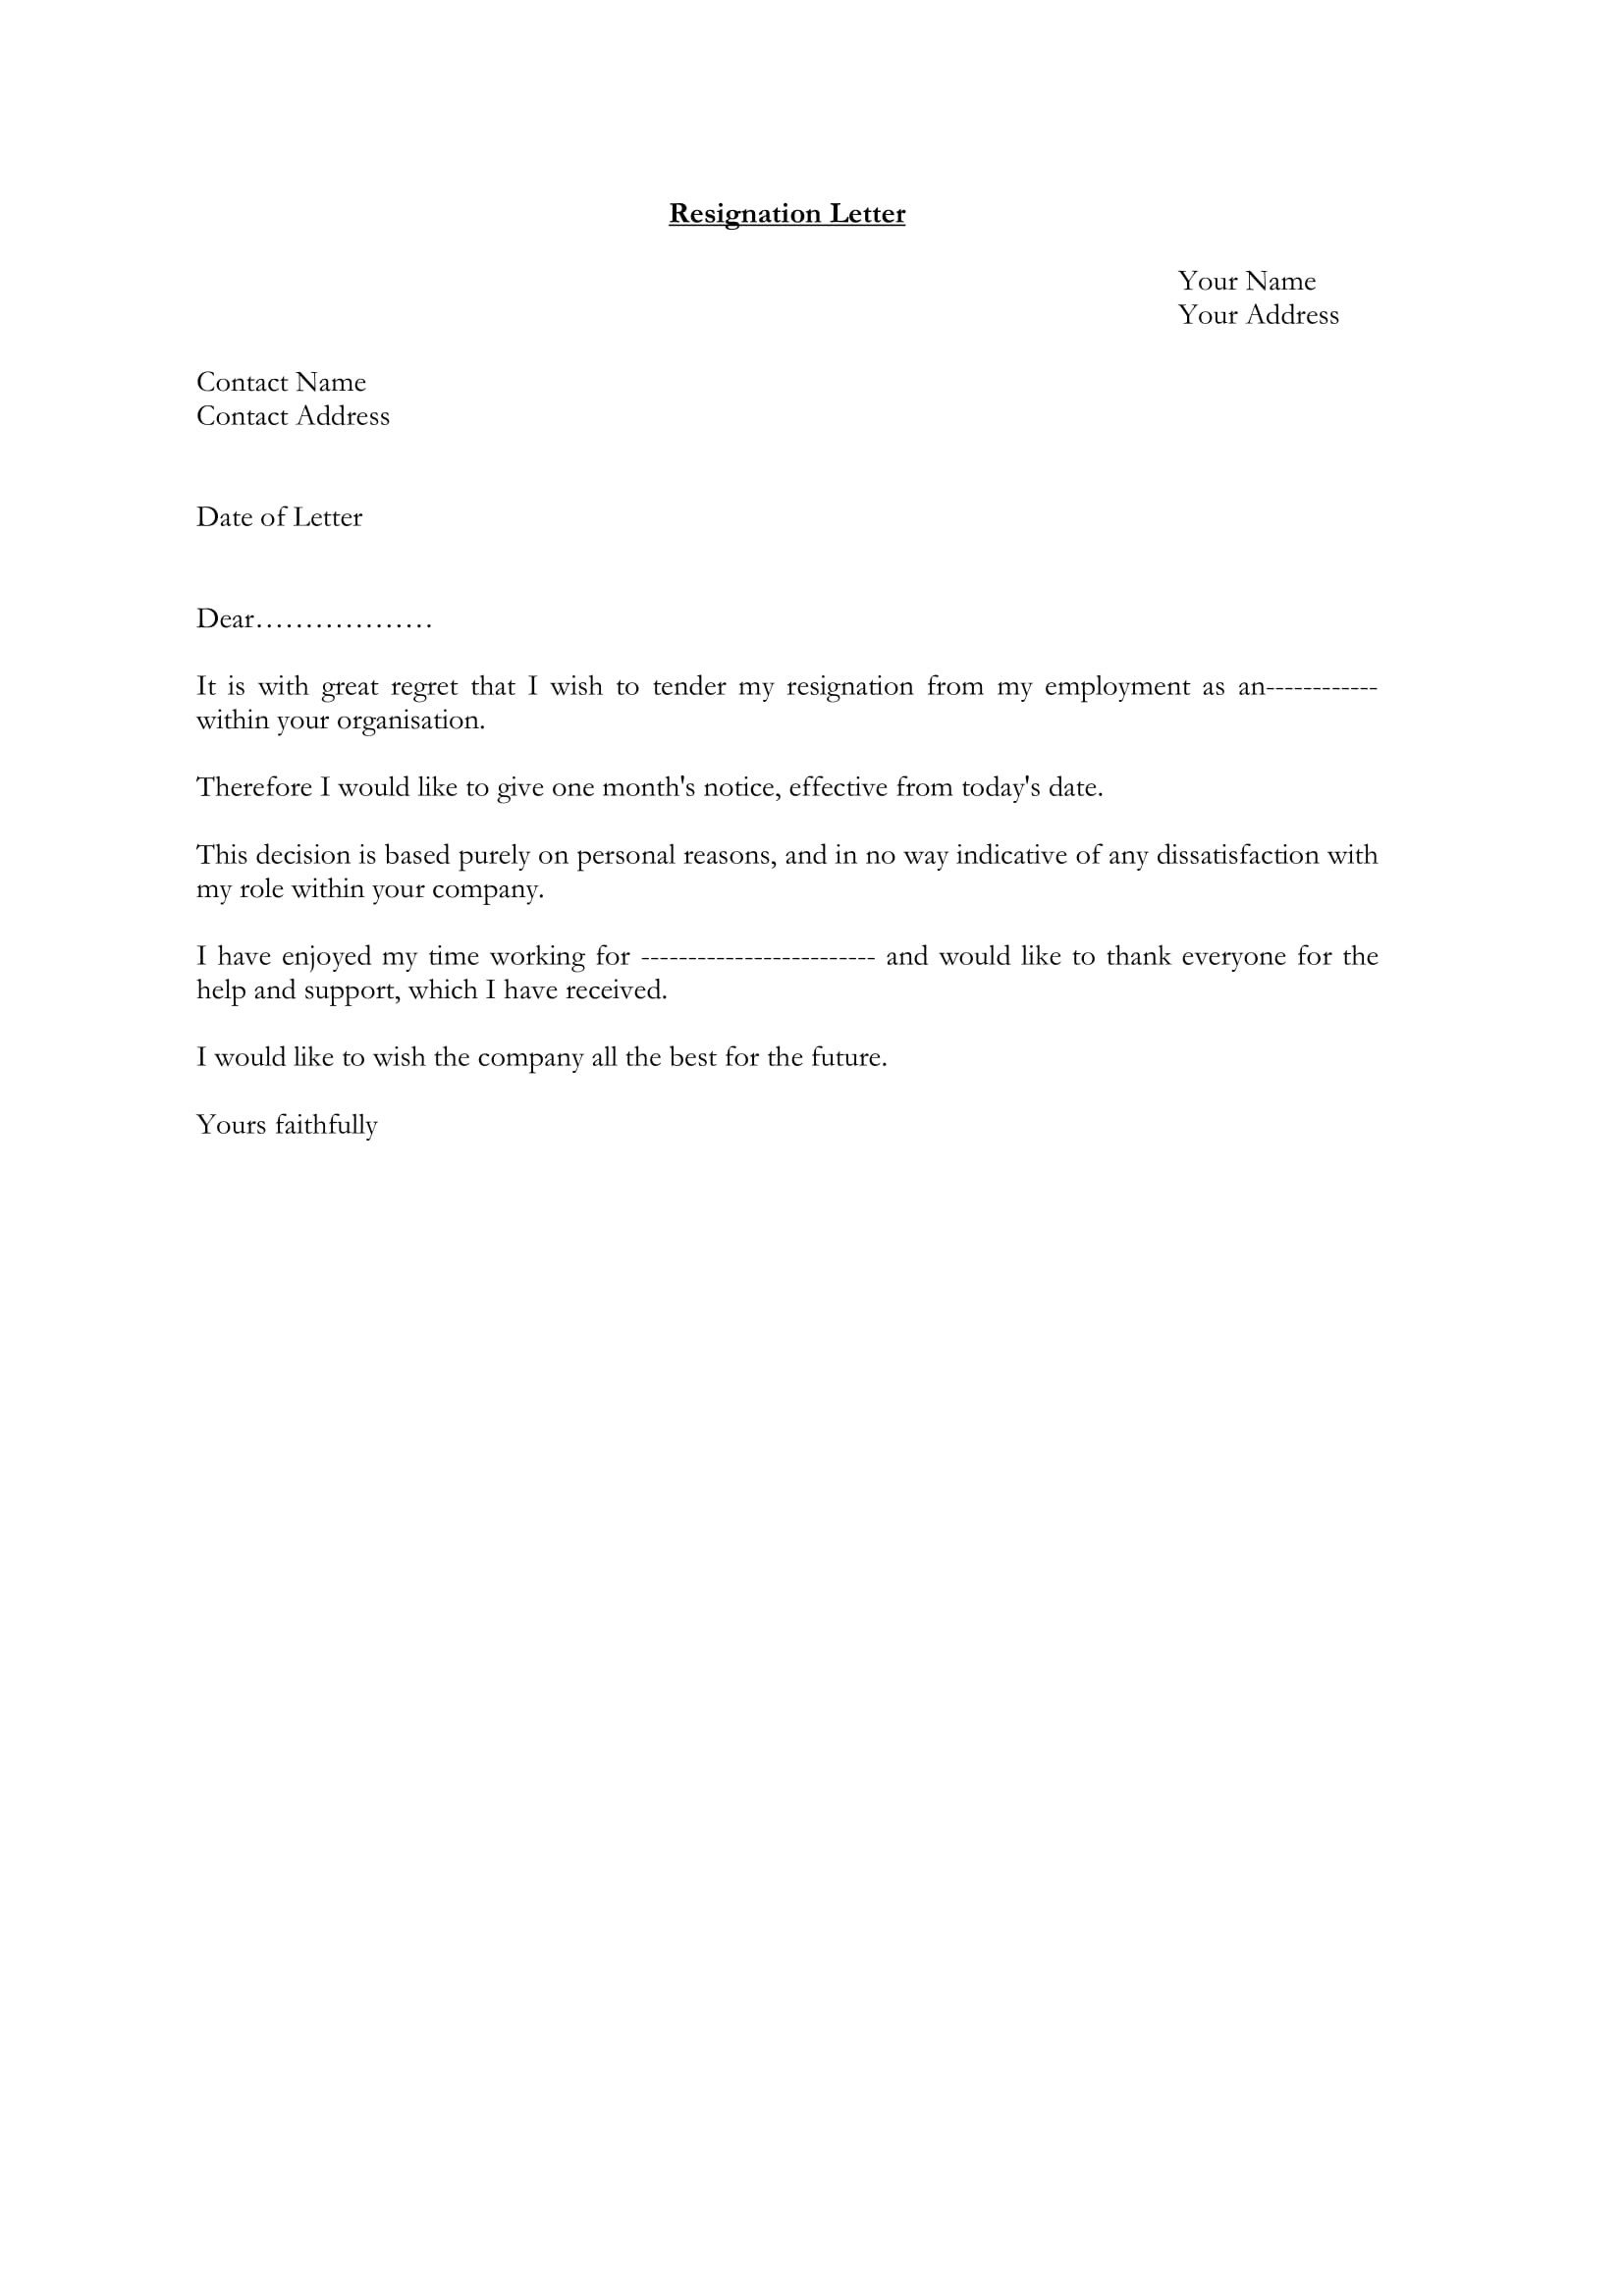 Letters Of Resignation Template 12 Employee Resignation Letter Examples Pdf Word